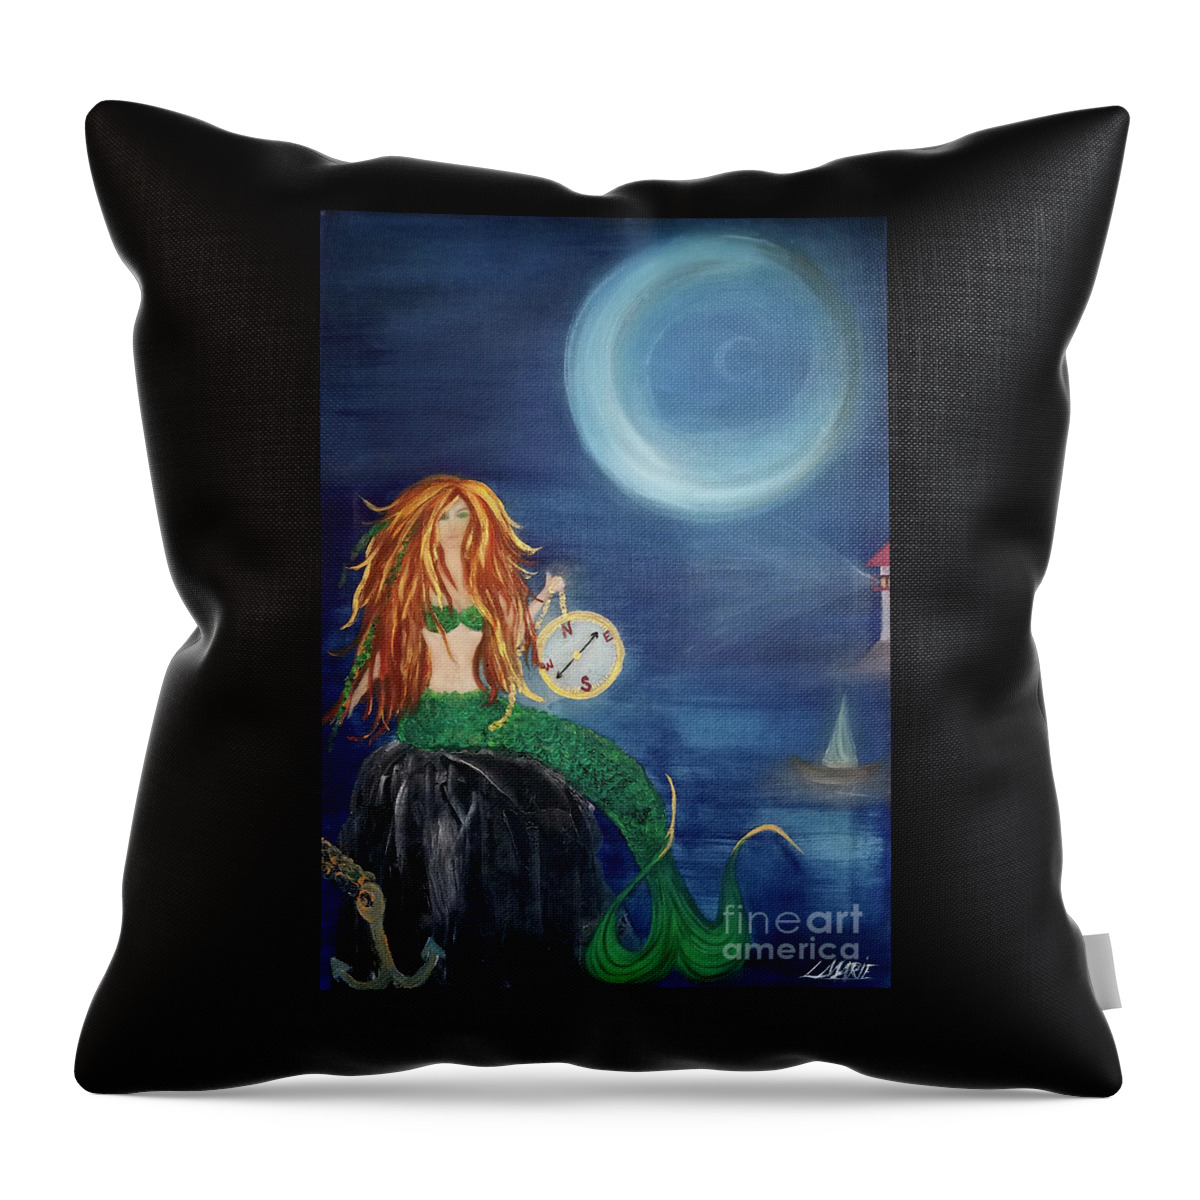 Mermaid Throw Pillow featuring the painting Compass Mermaid by Artist Linda Marie